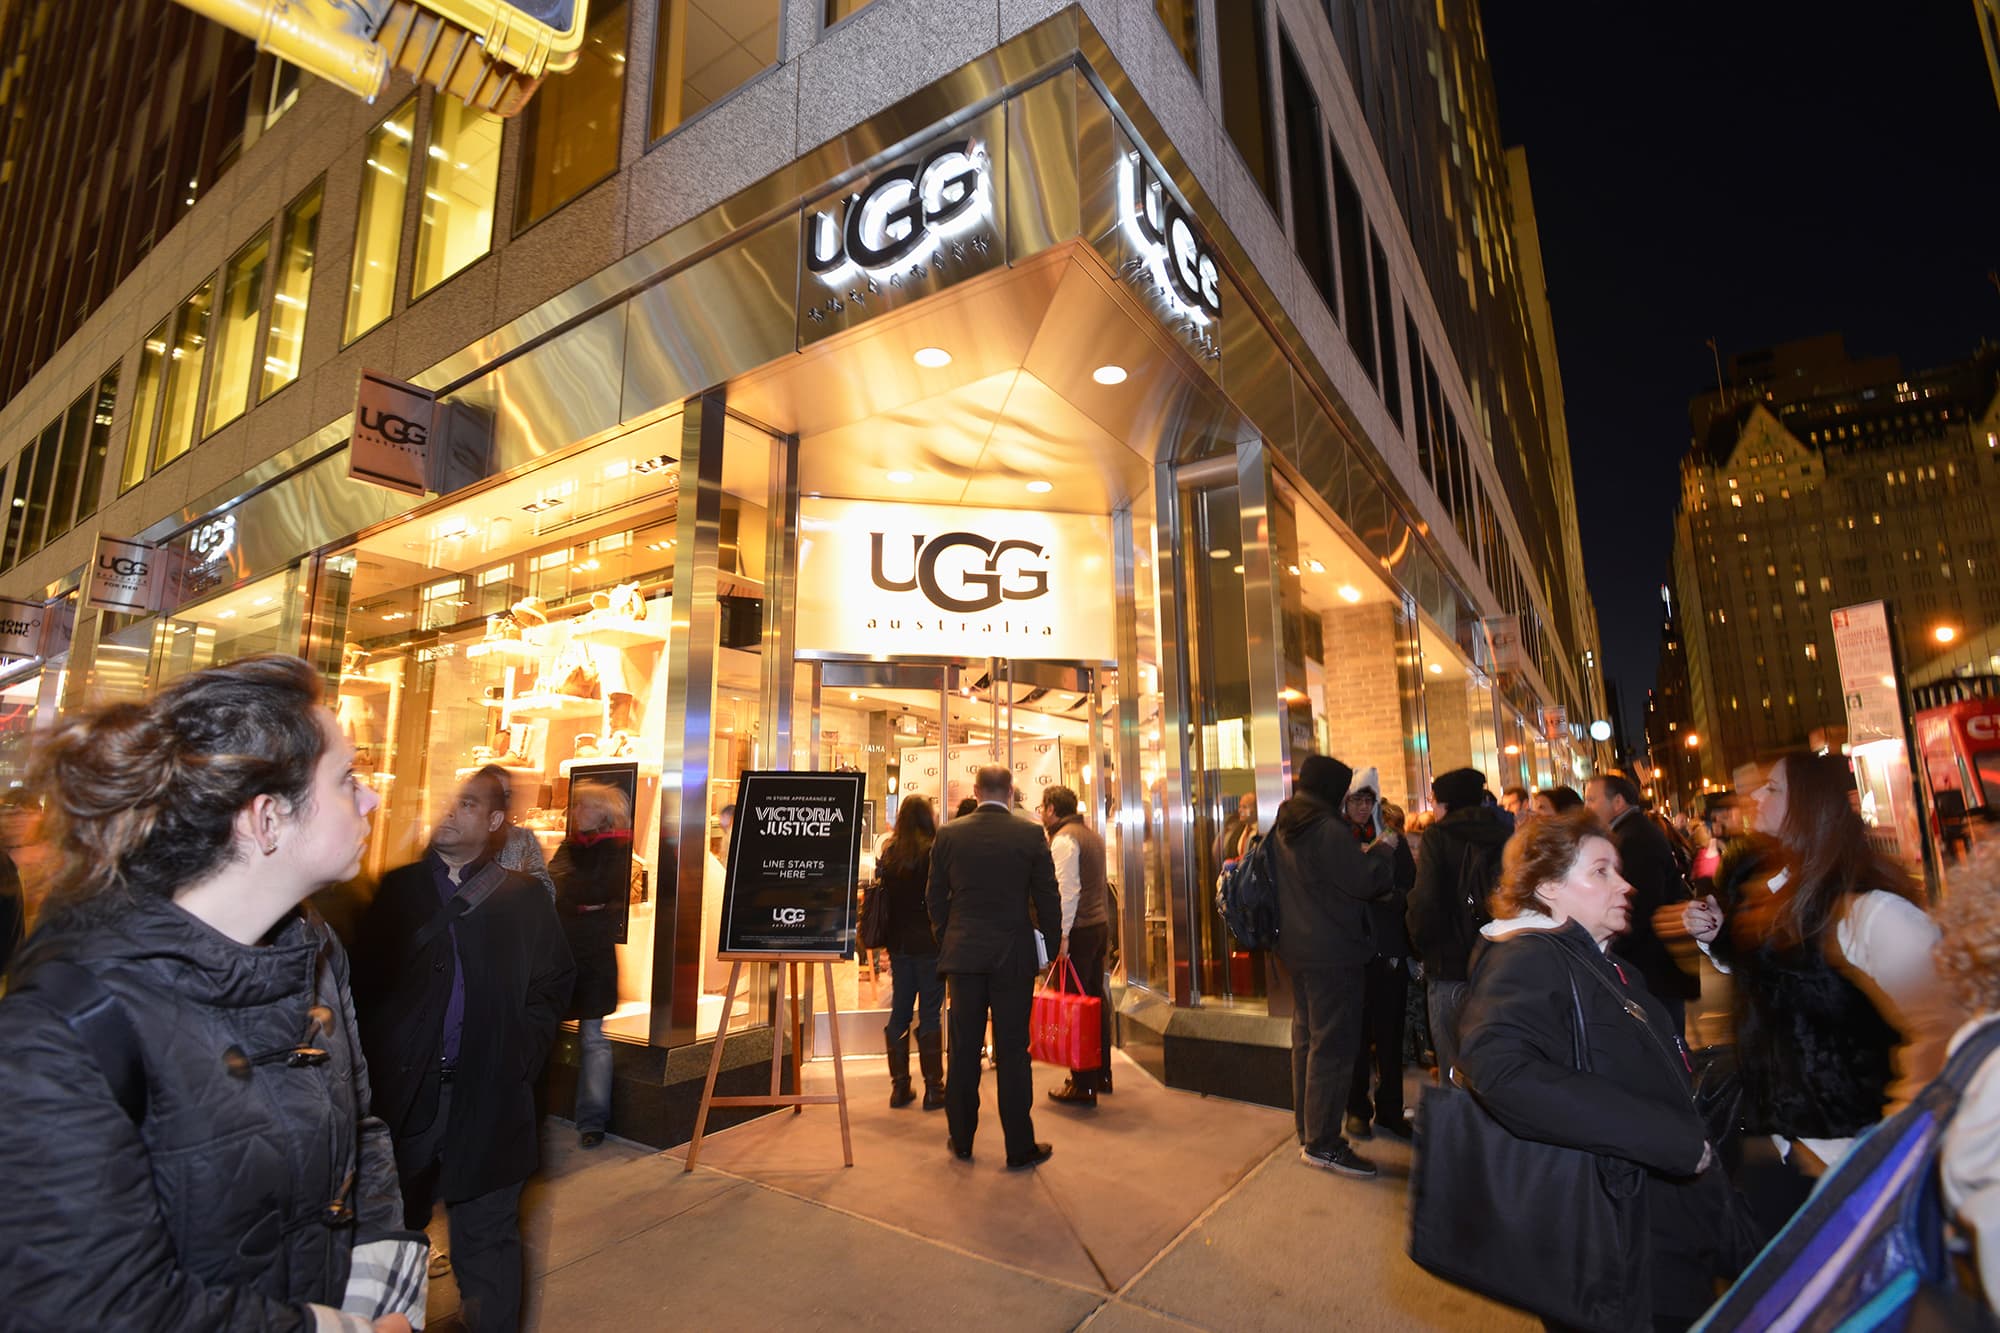 Ugg NYC Flagship Store Opened During Pandemic: Photos